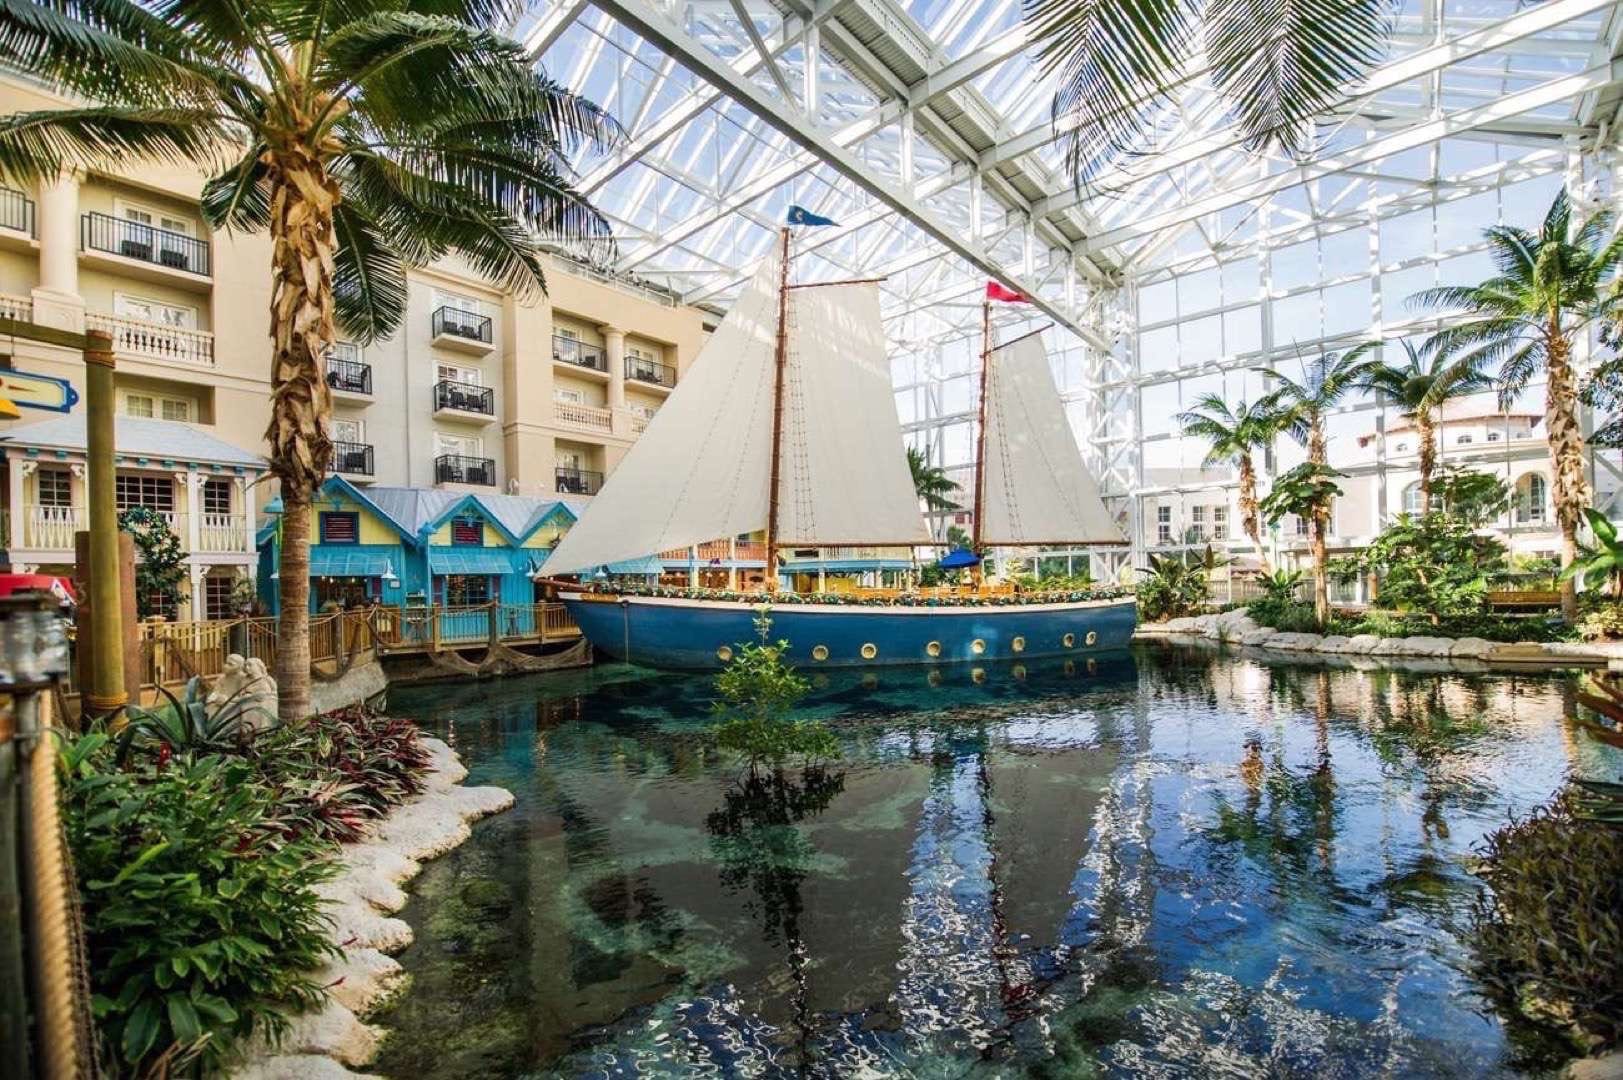 View at Gaylord Palms Resort and Convention Center overlooking a ship on the lake surrounded by palm trees and trees.